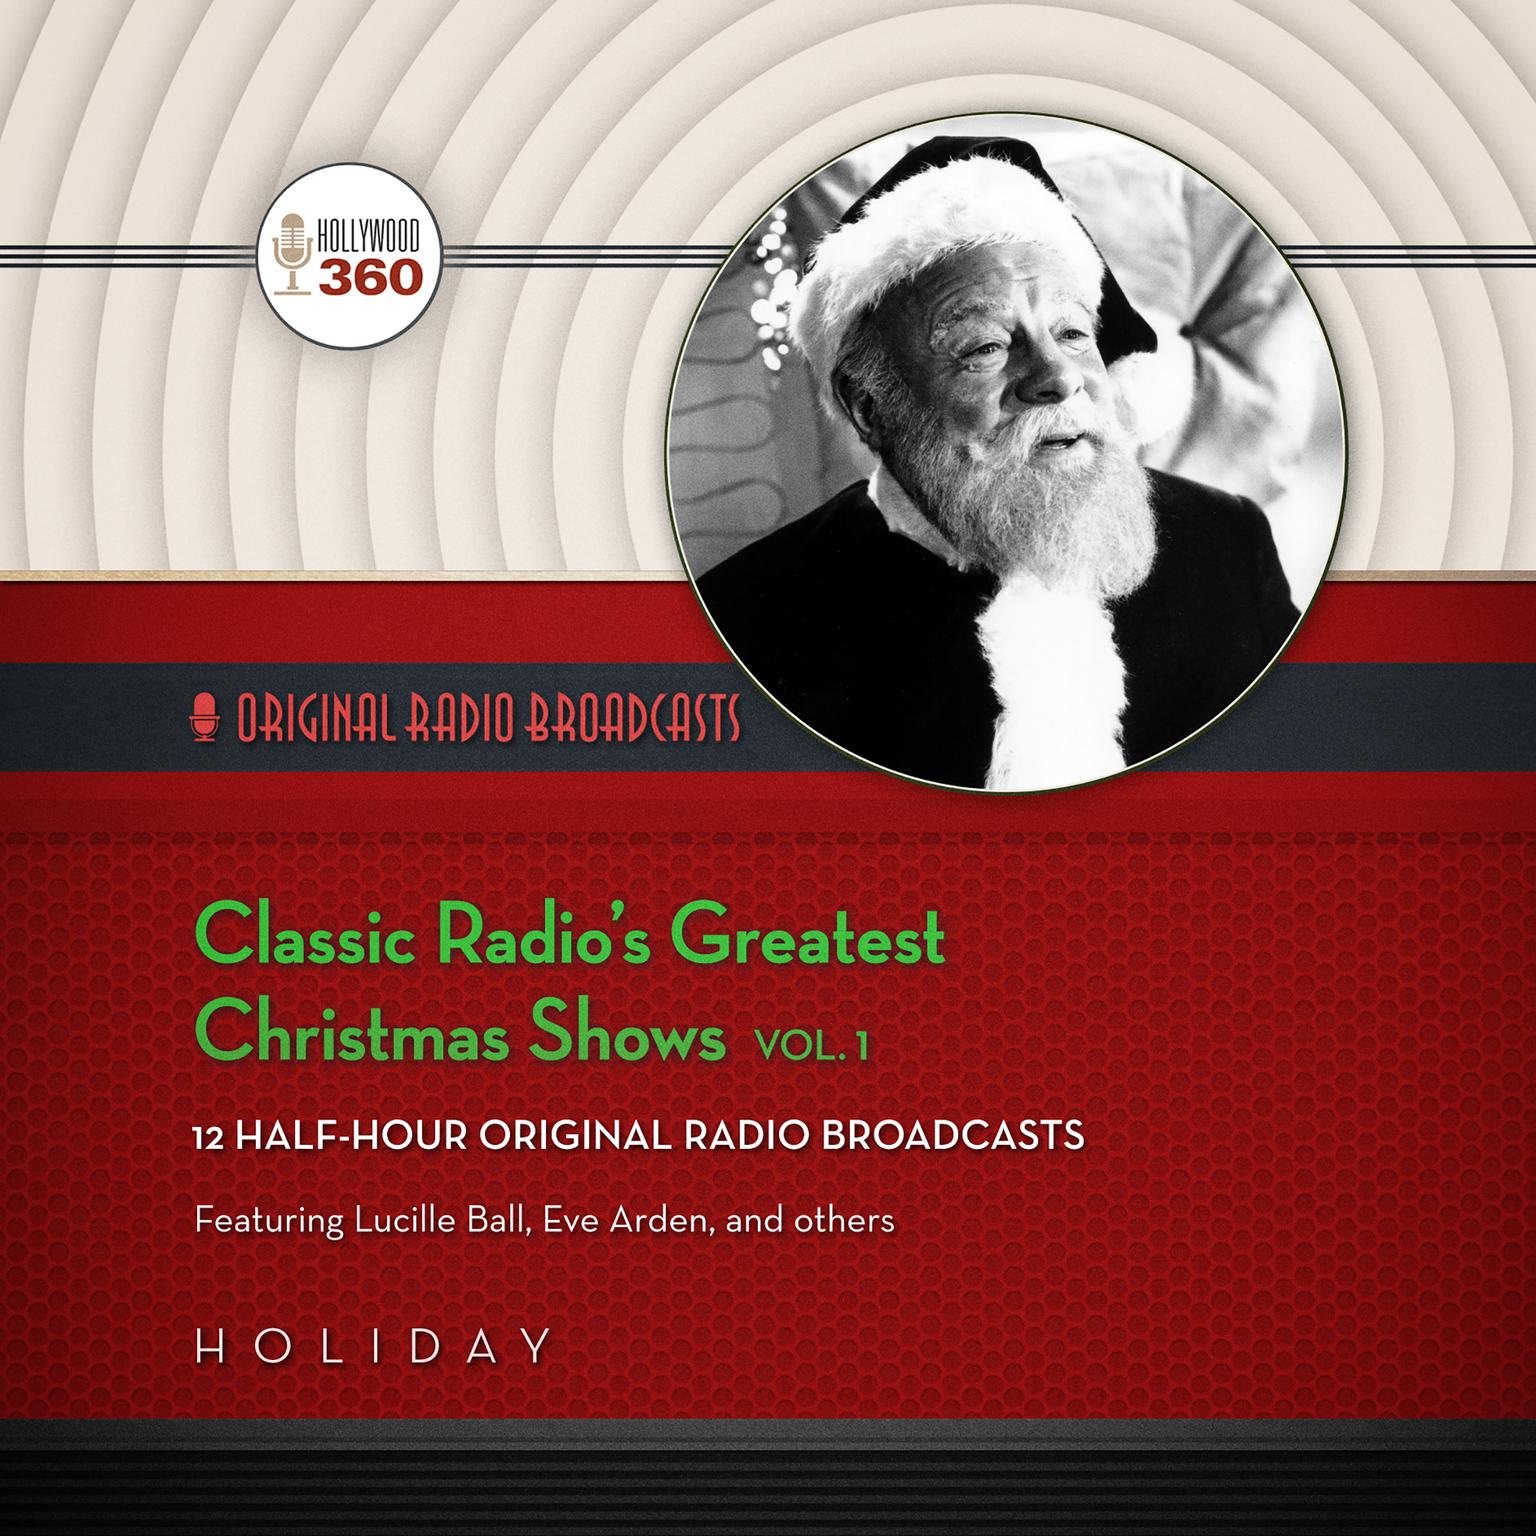 Classic Radio’s Greatest Christmas Shows, Vol. 1 Audiobook, by Hollywood 360